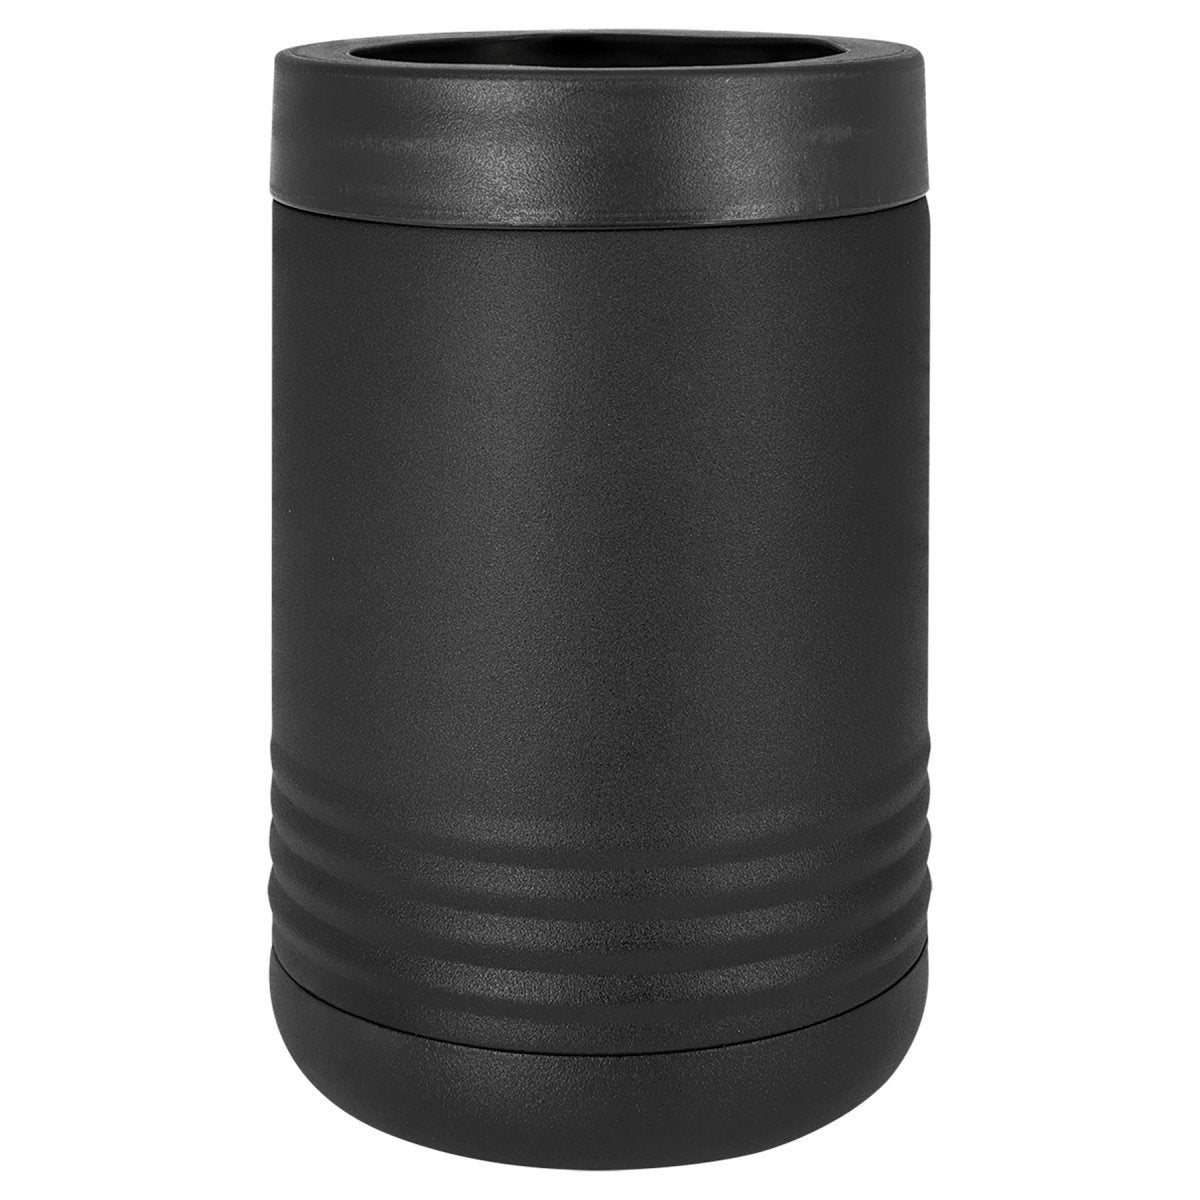 https://theluuacompany.com/cdn/shop/products/12-16oz-stainless-steel-powder-coated-vacuum-insulated-beverage-holder-972099.jpg?v=1669959606&width=1920